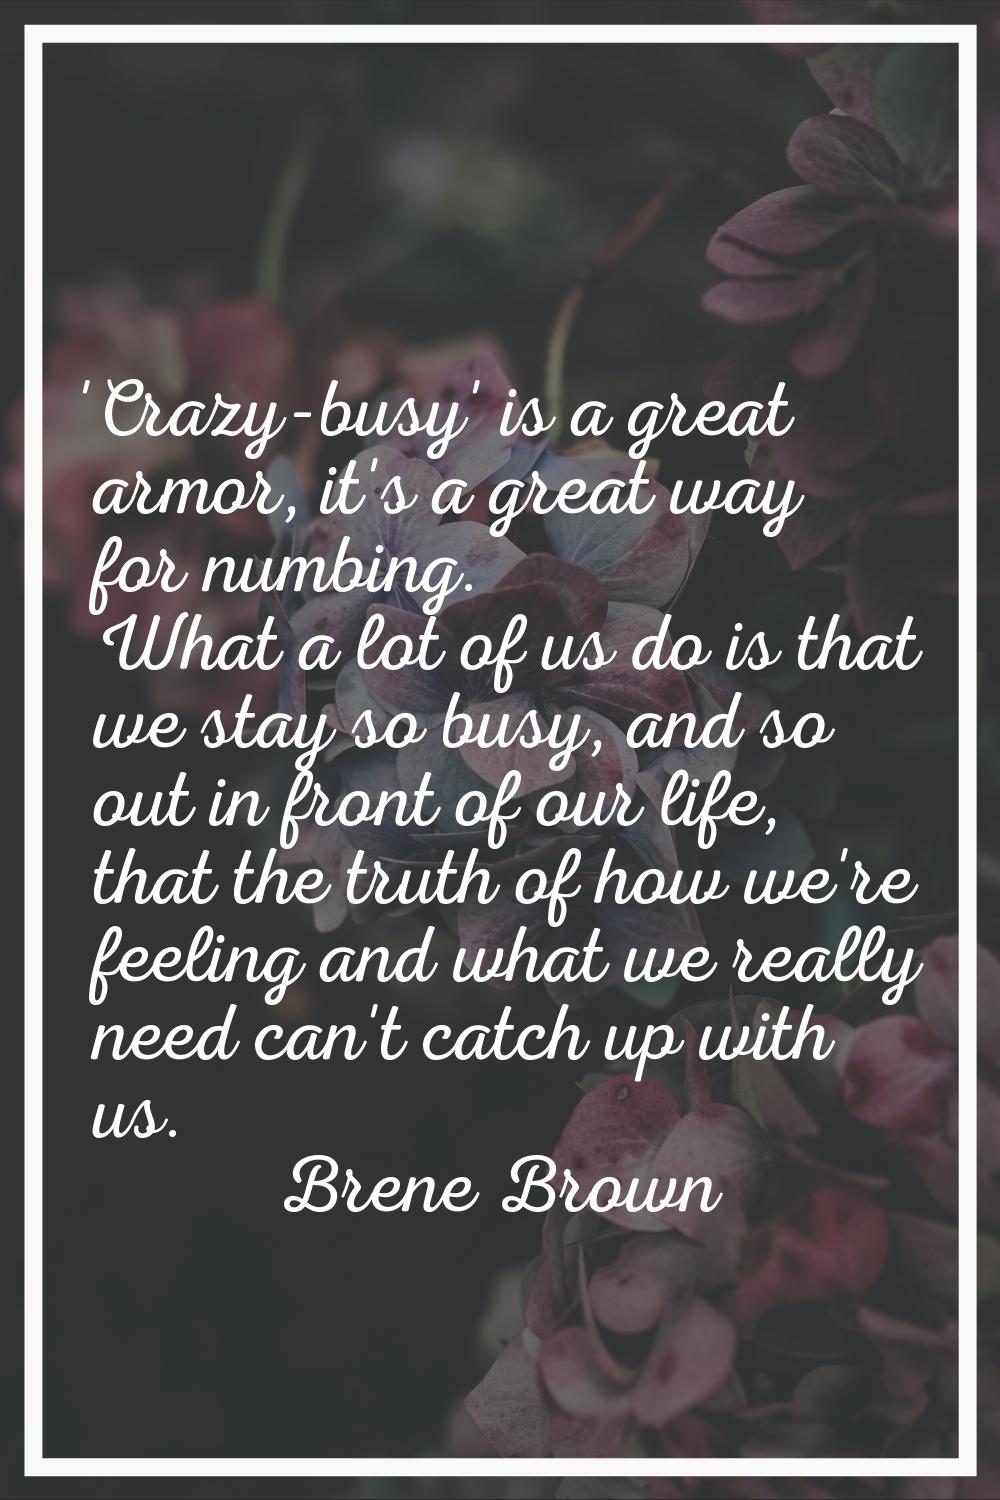 'Crazy-busy' is a great armor, it's a great way for numbing. What a lot of us do is that we stay so